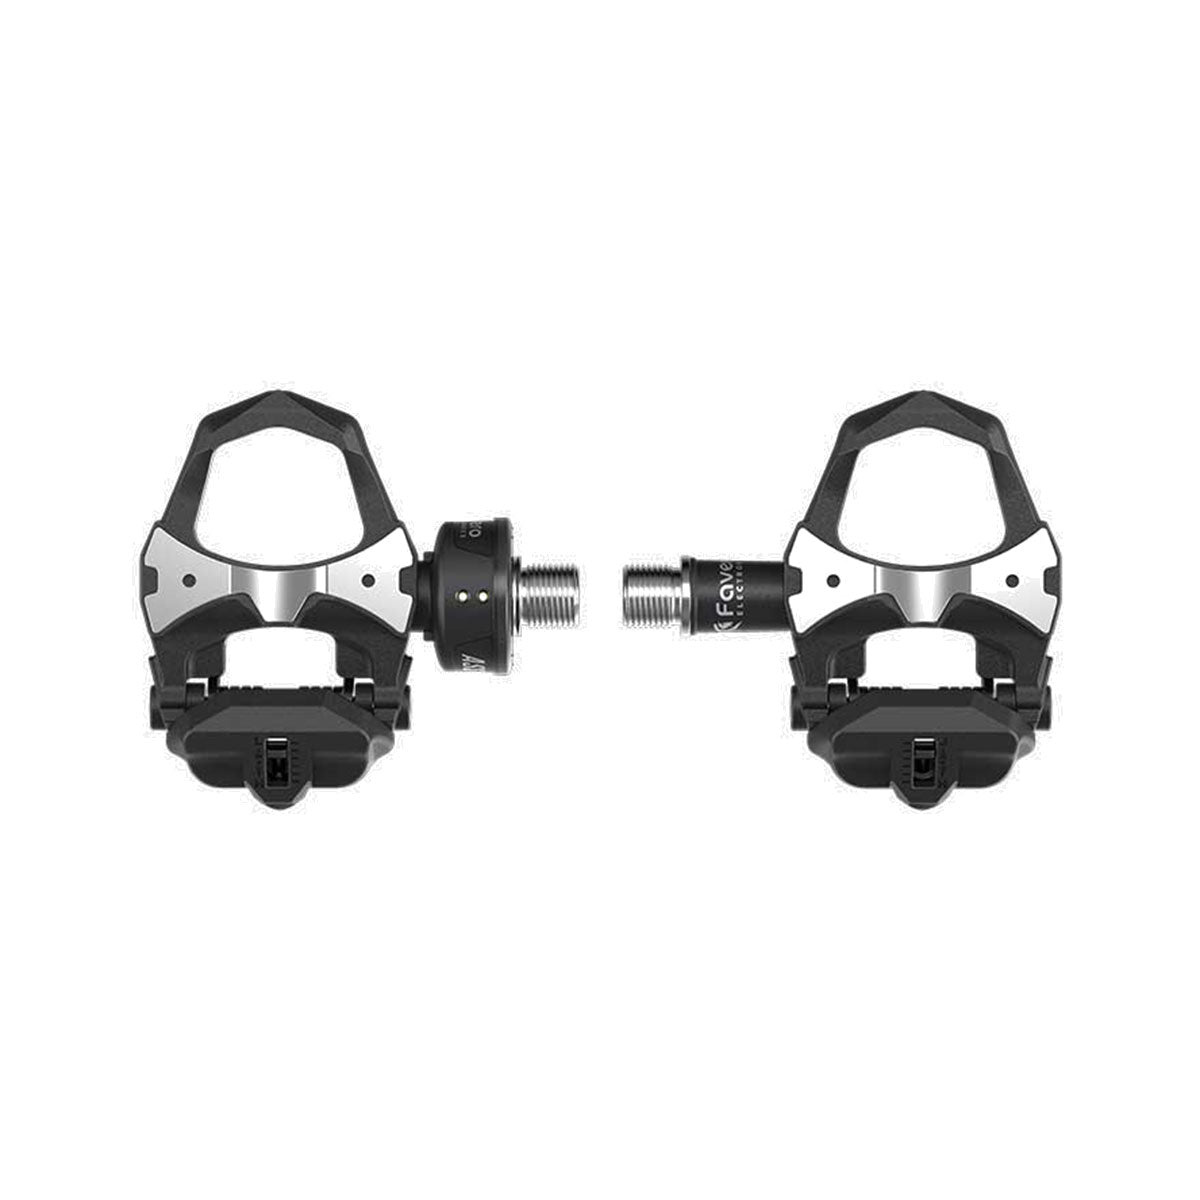 Assioma UNO Power Meter Pedals